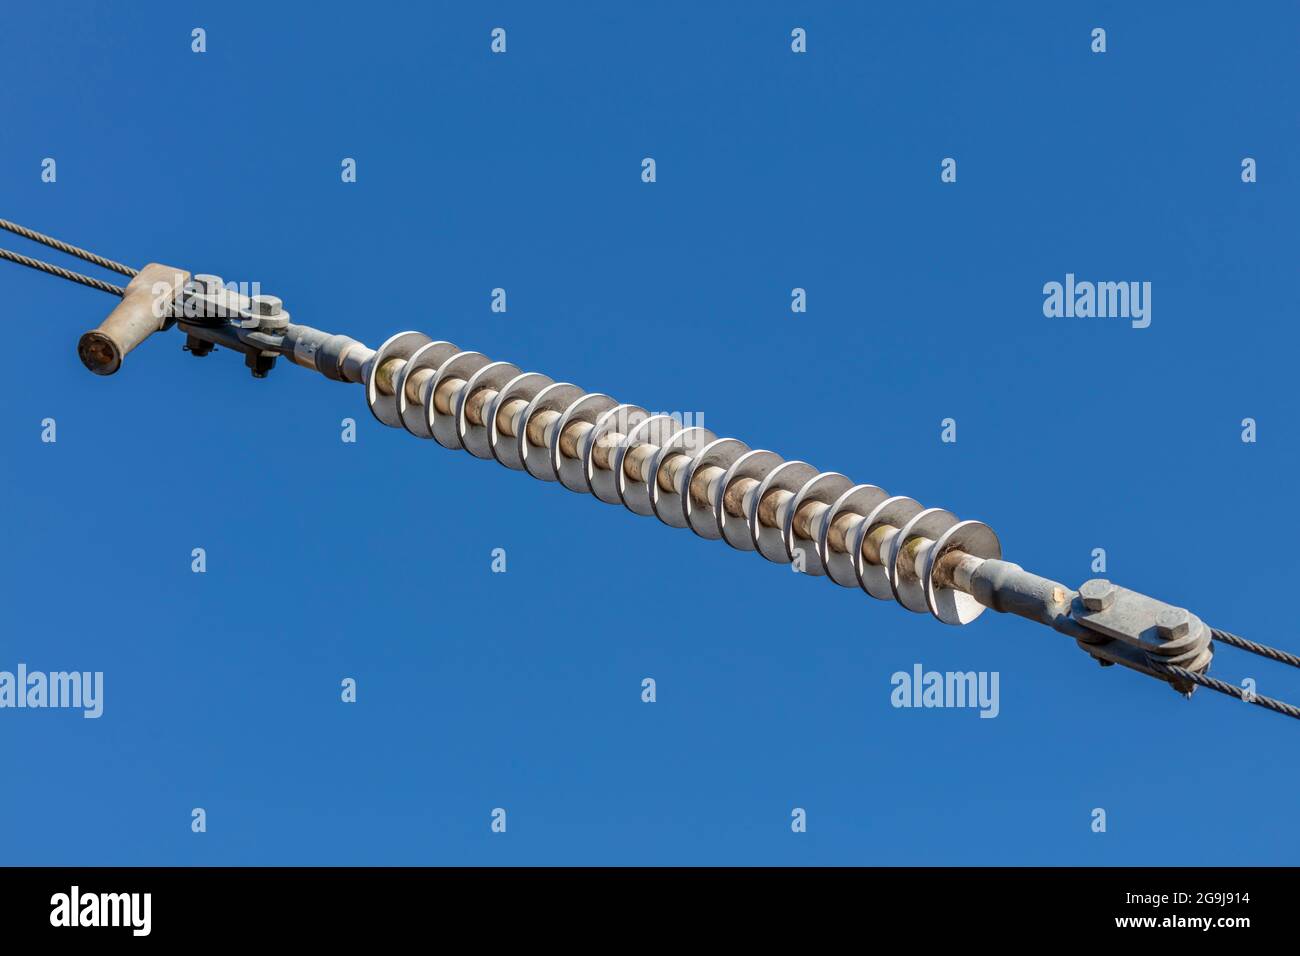 Photograph of a tensioner bracket on a transmission line against a bright blue sky Stock Photo